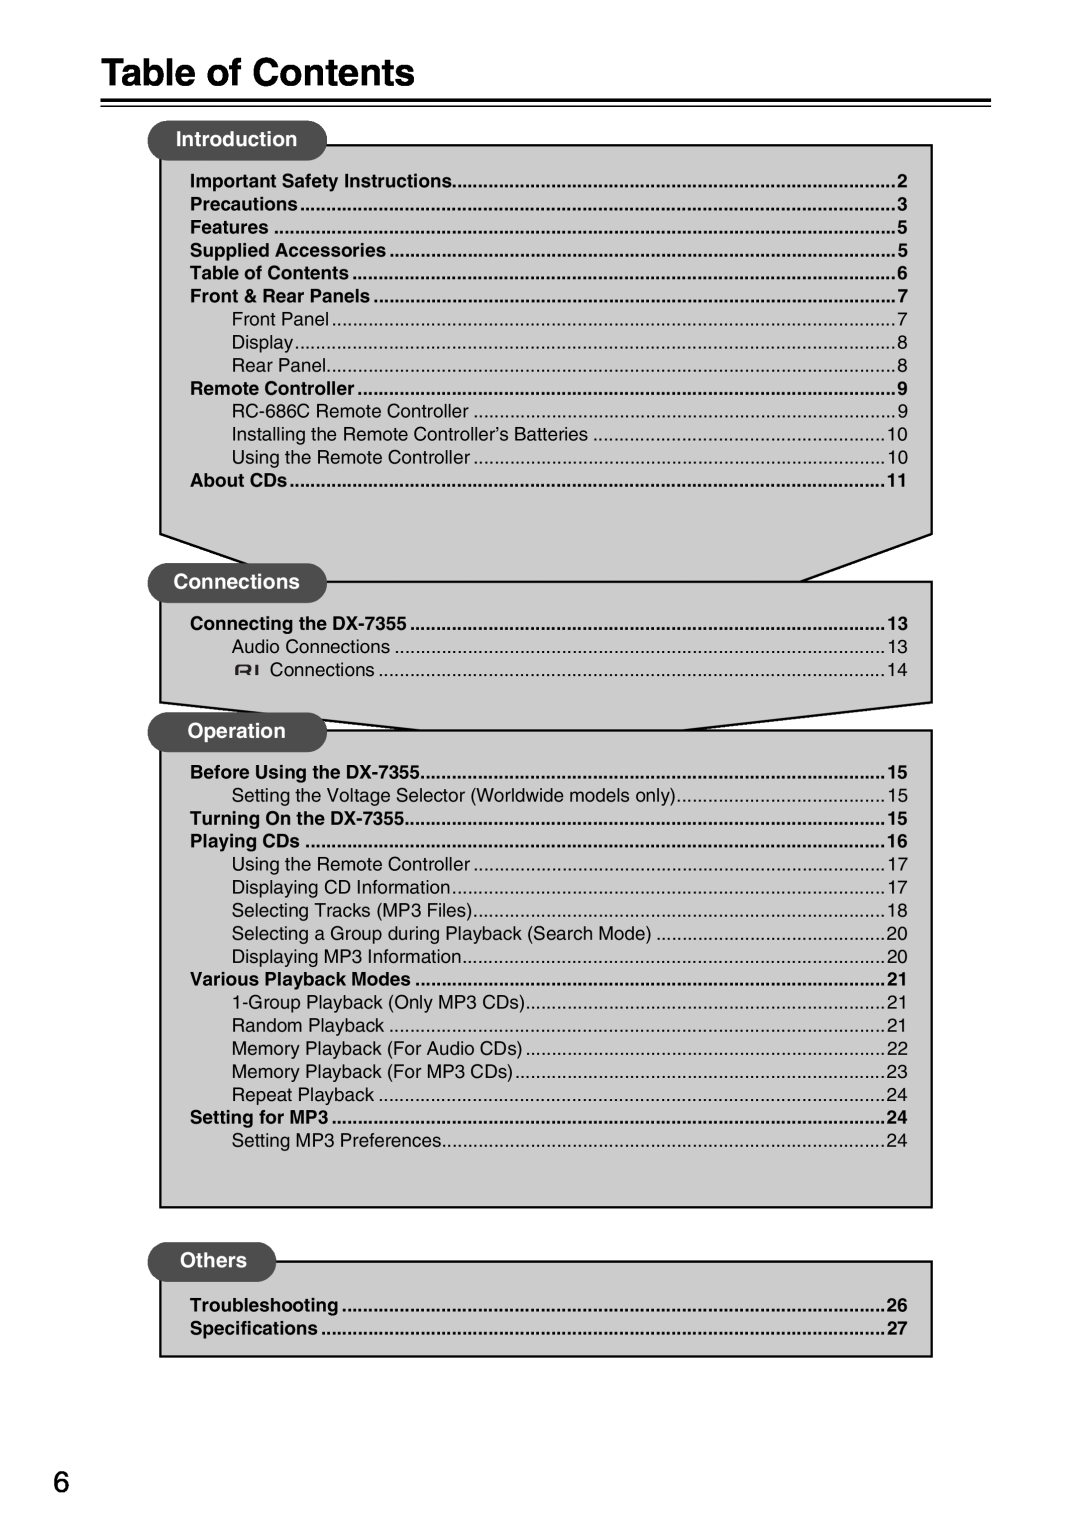 Onkyo DX-7355 instruction manual Table of Contents, Introduction, Connections, Operation, Others 